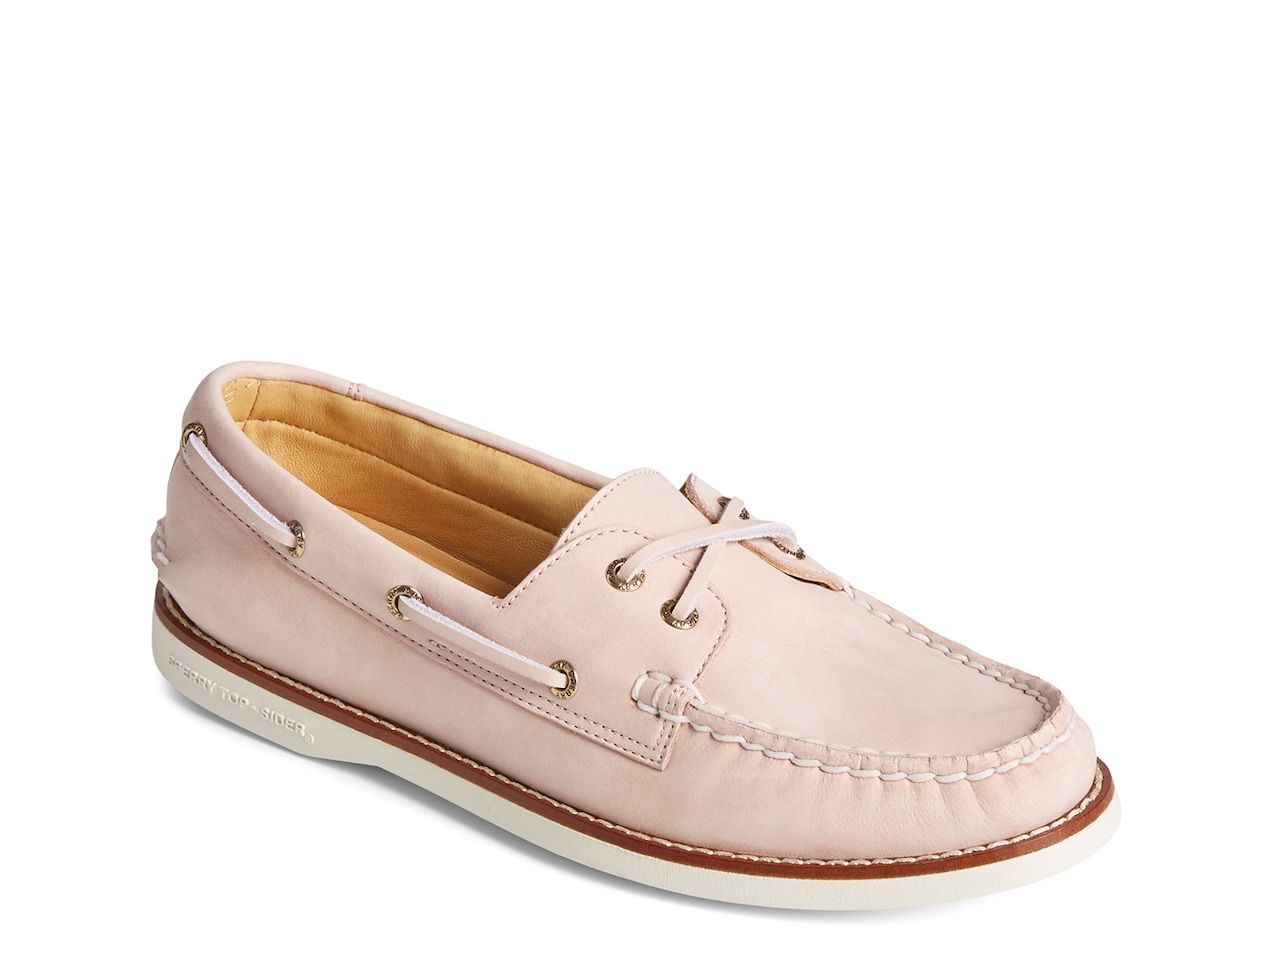 Sperry Women's Gold Cup Authentic Original 2-Eye Montana Boat Shoes (select sizes)